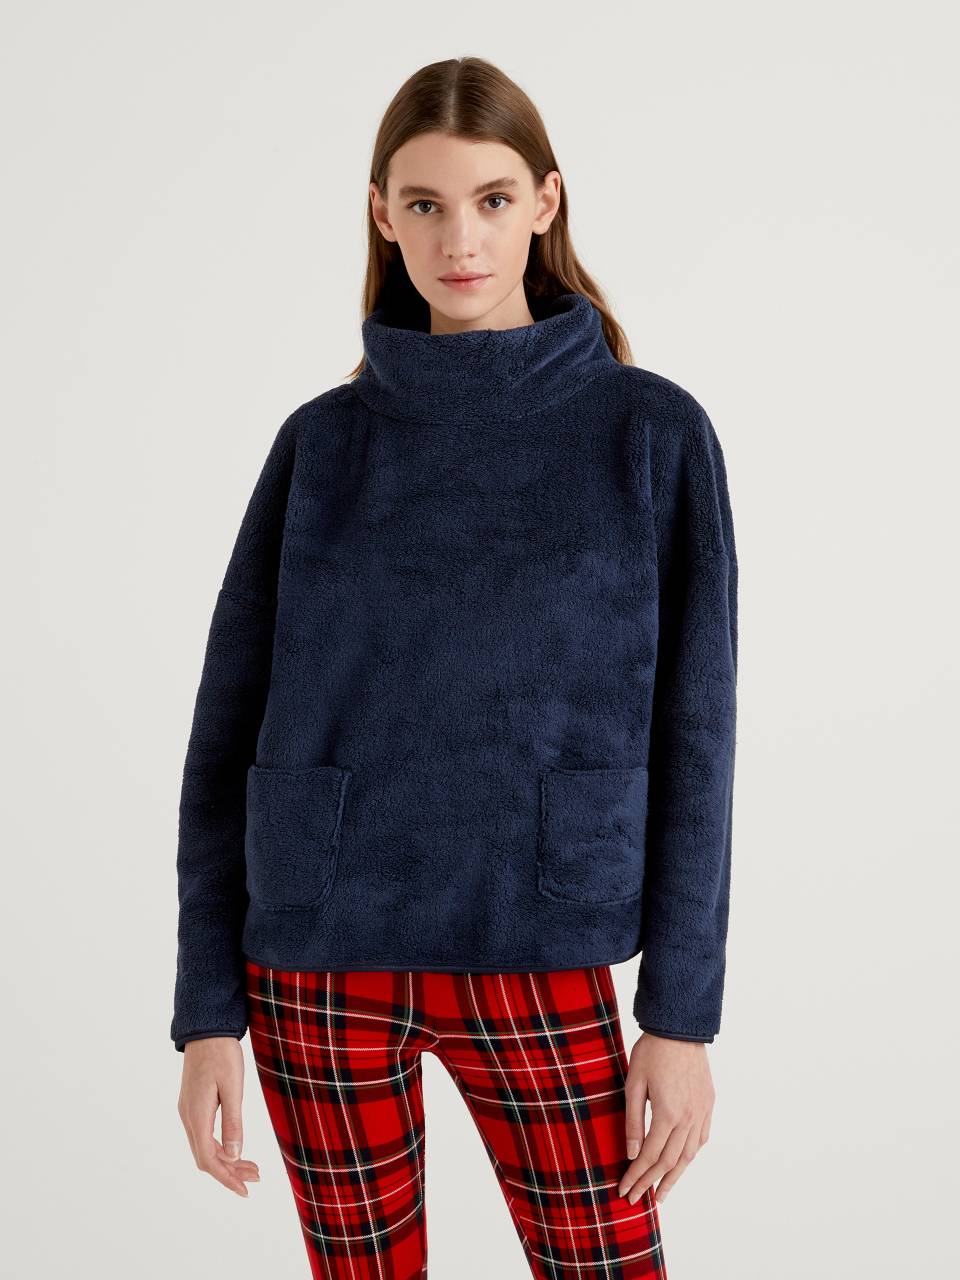 Benetton Sweater in synthetic fur with pockets. 1